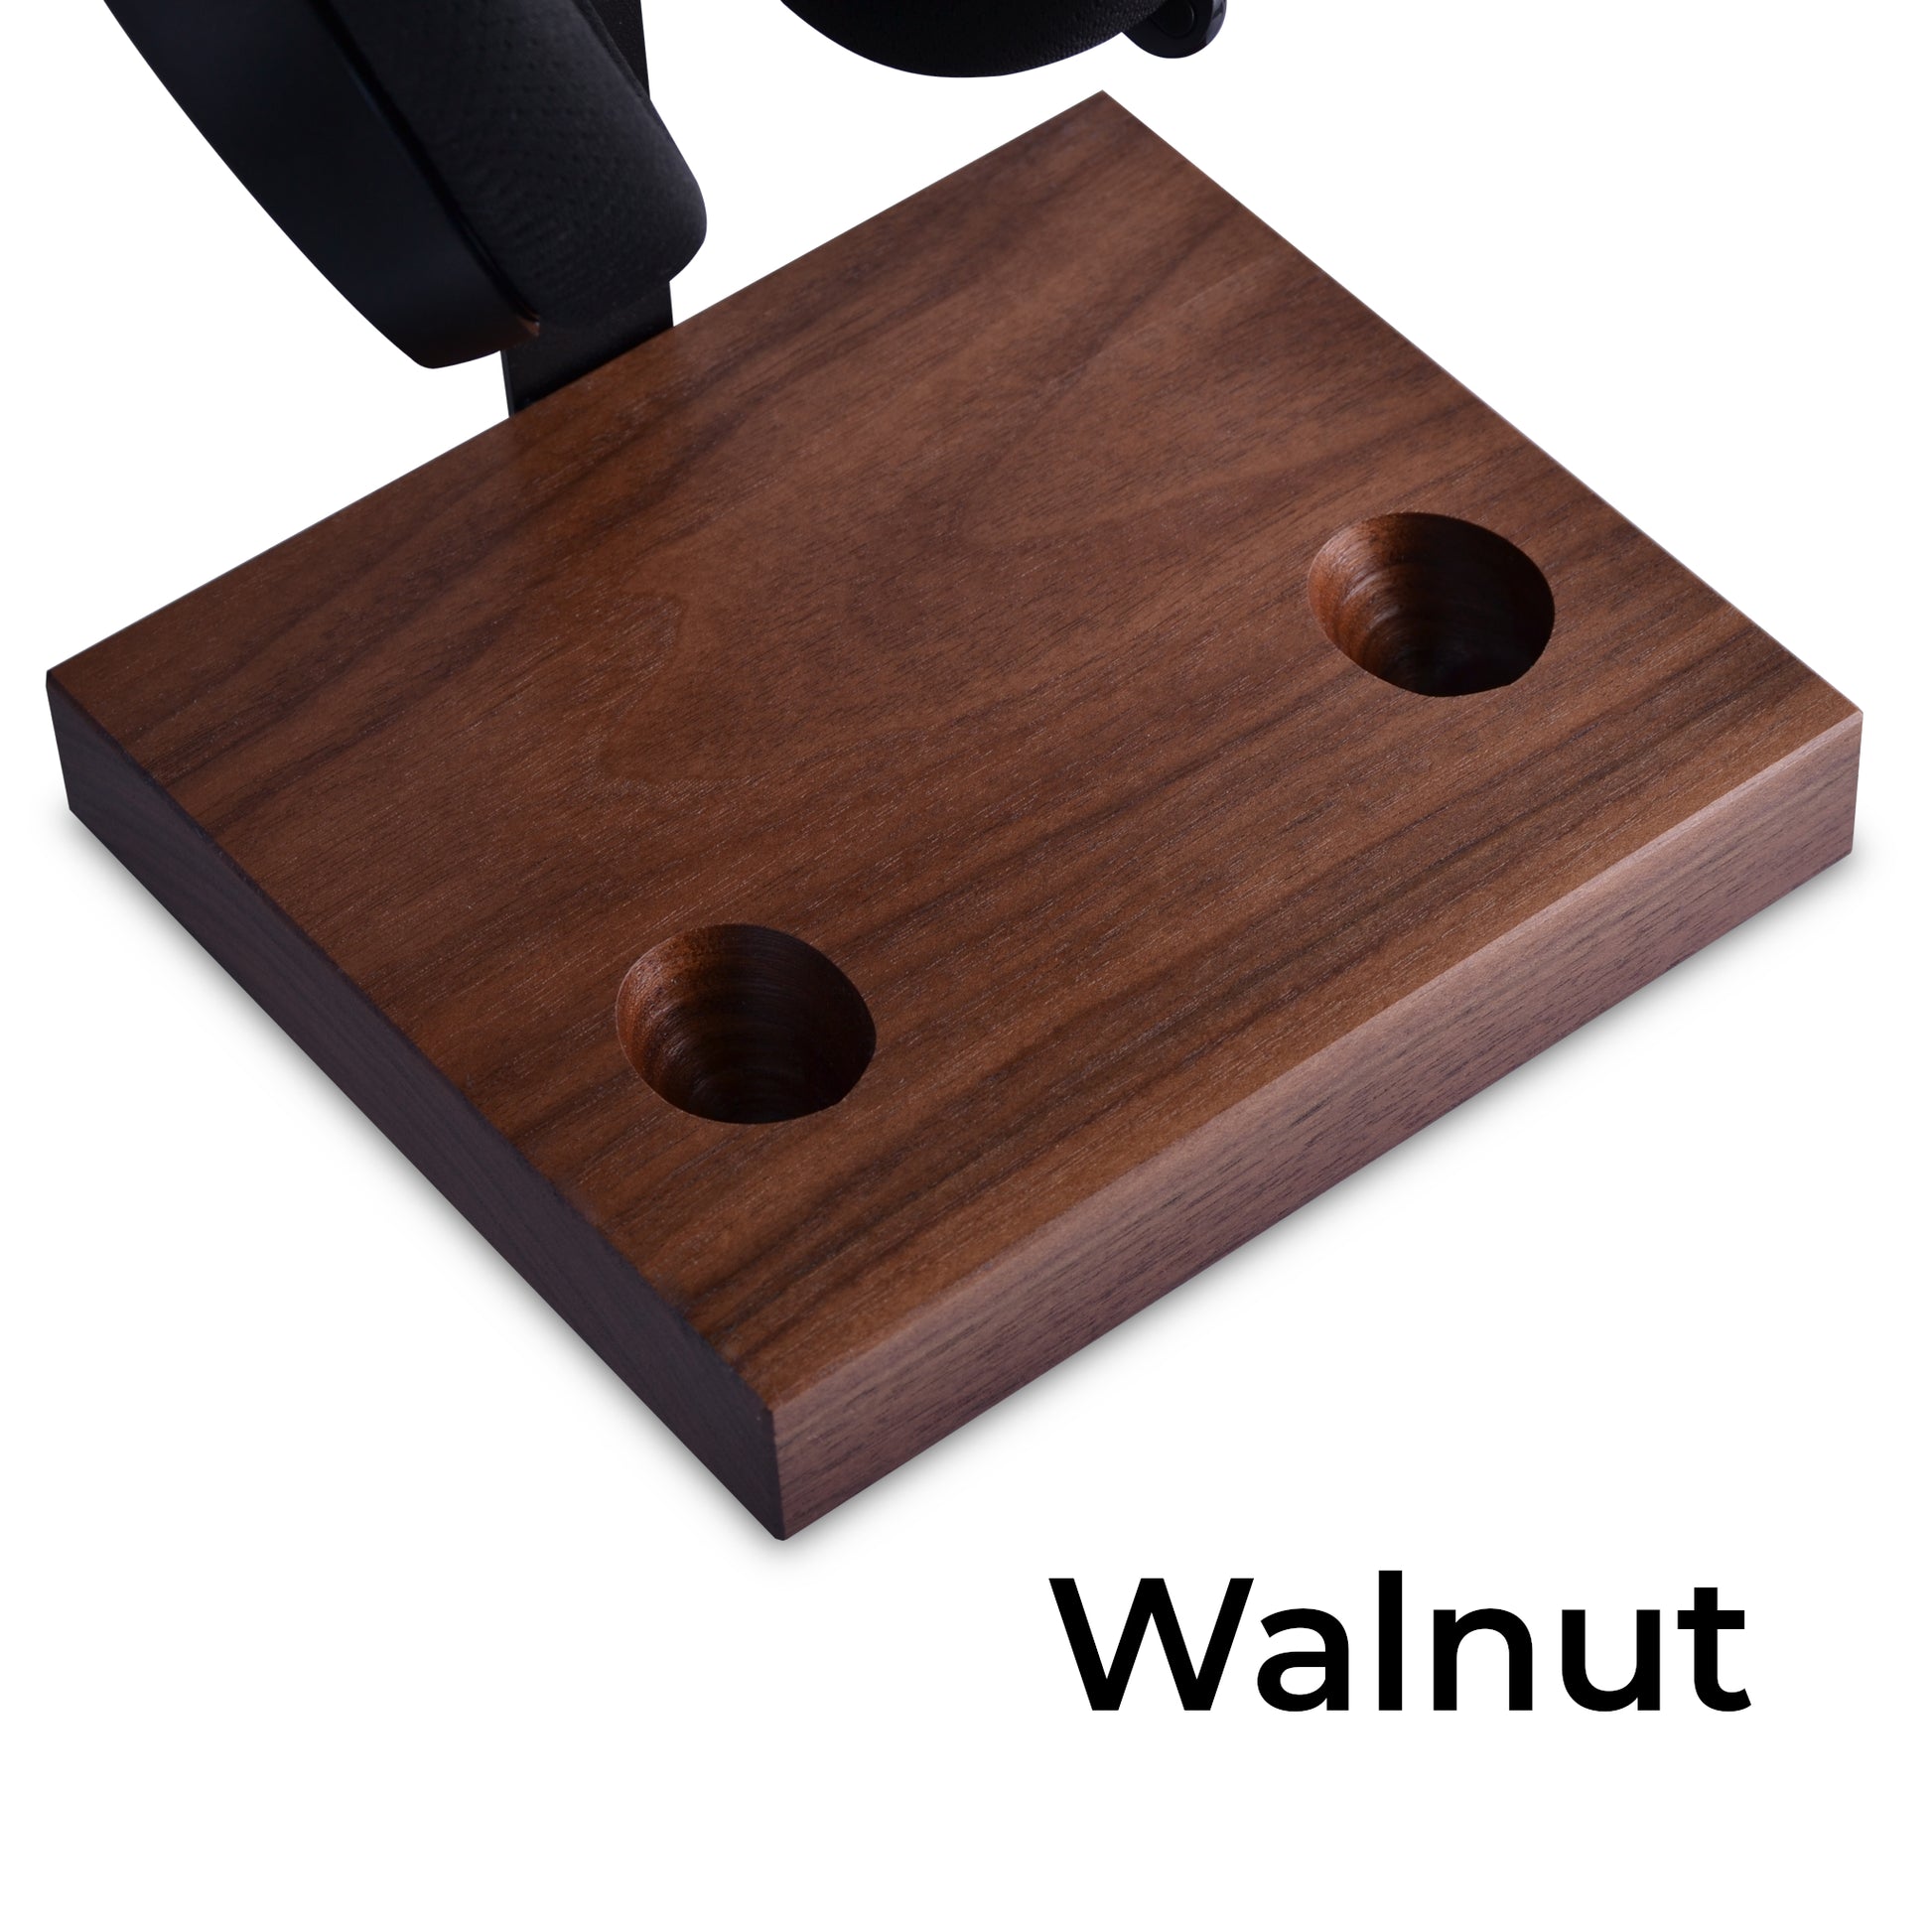 Walnut version of headset and controller stand for Playstation 5 dualsense controller